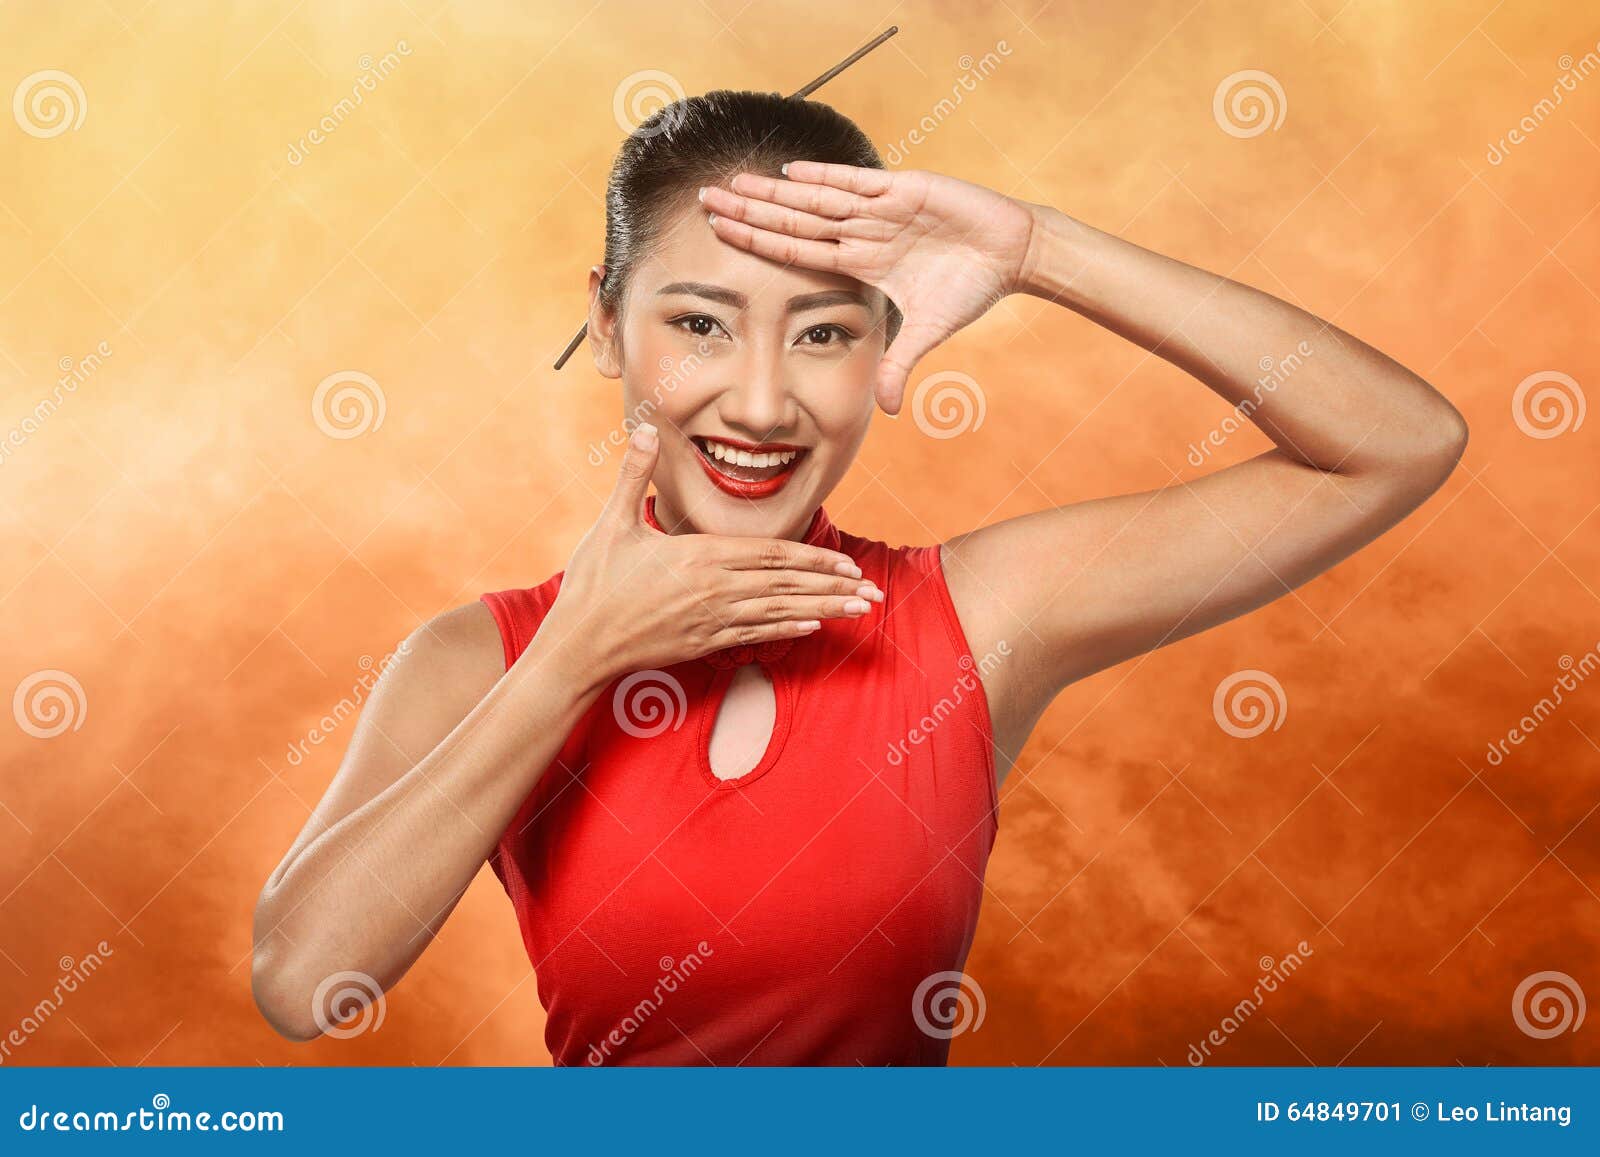 chinese woman in cheongsam dress framing her face with hand